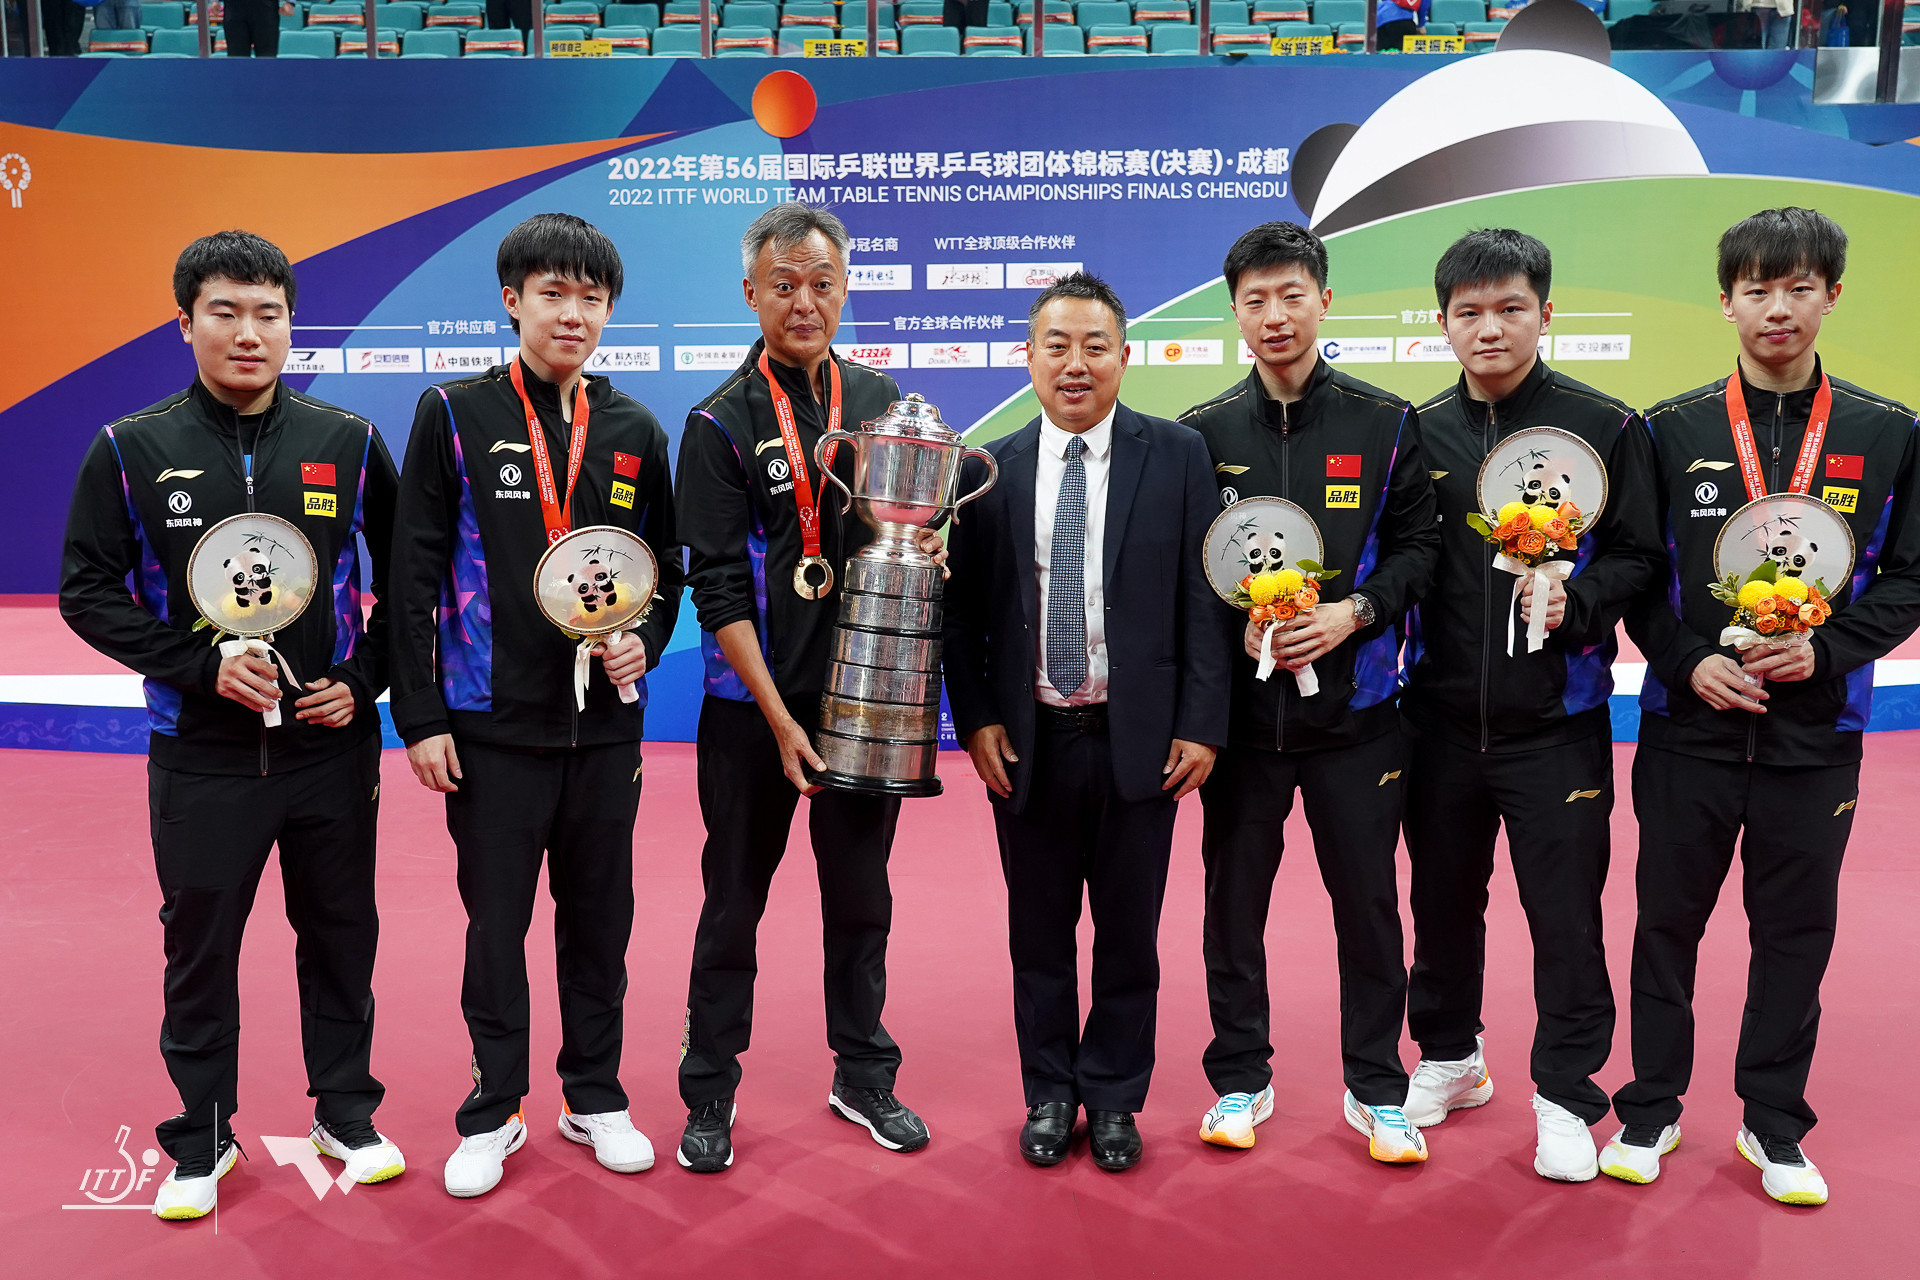 China won the men's team title after besting Germany 3-0 ©World Table Tennis 